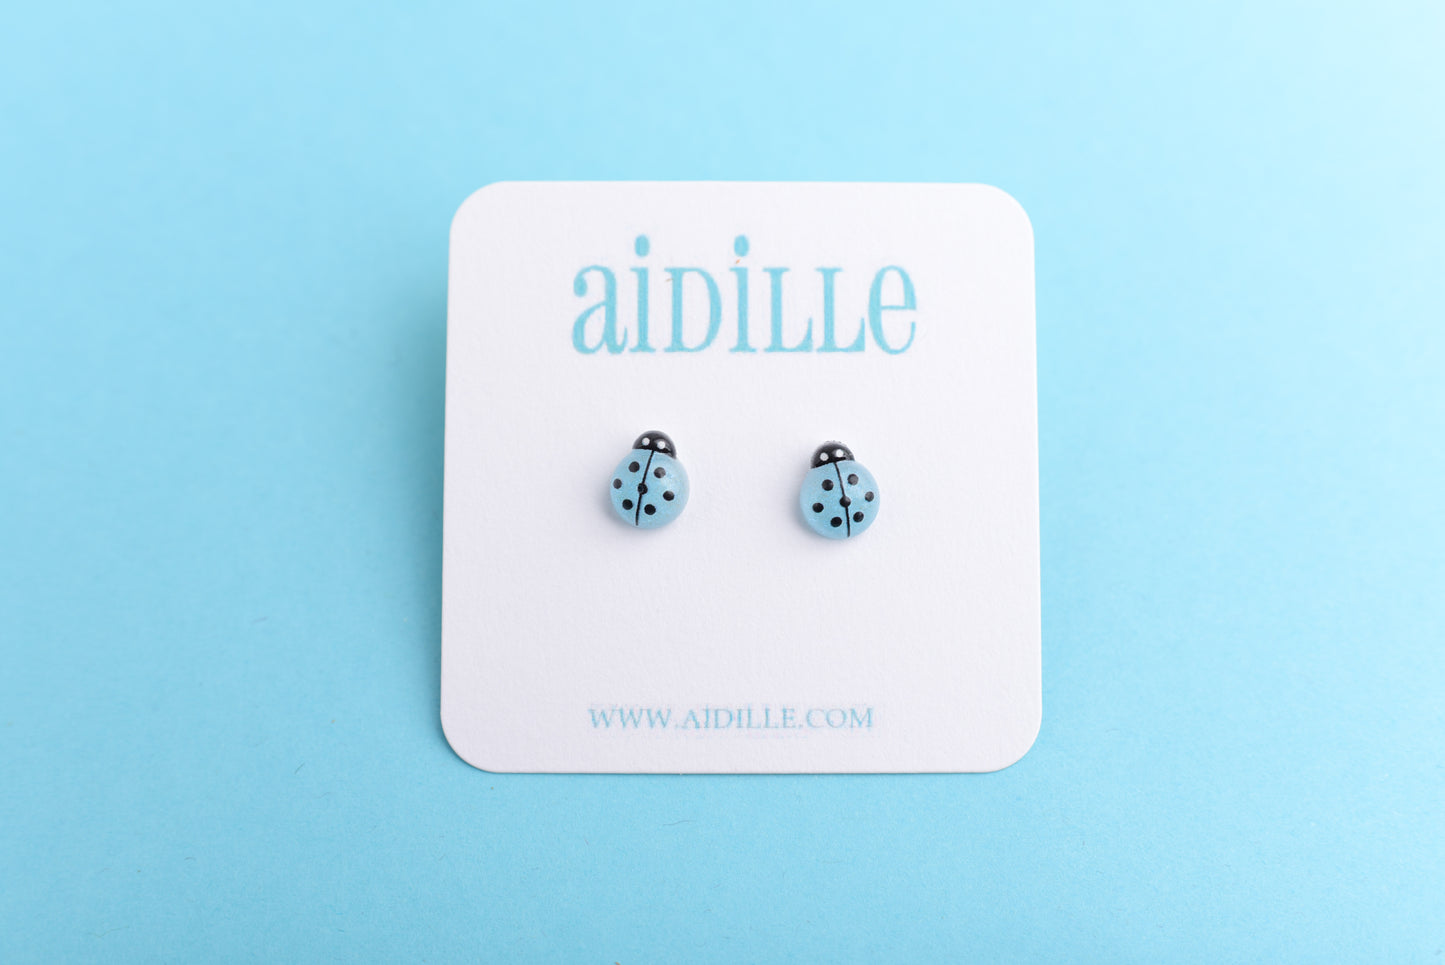 Little Ladybug Earrings with Titanium Posts- Choose from 8 Colors